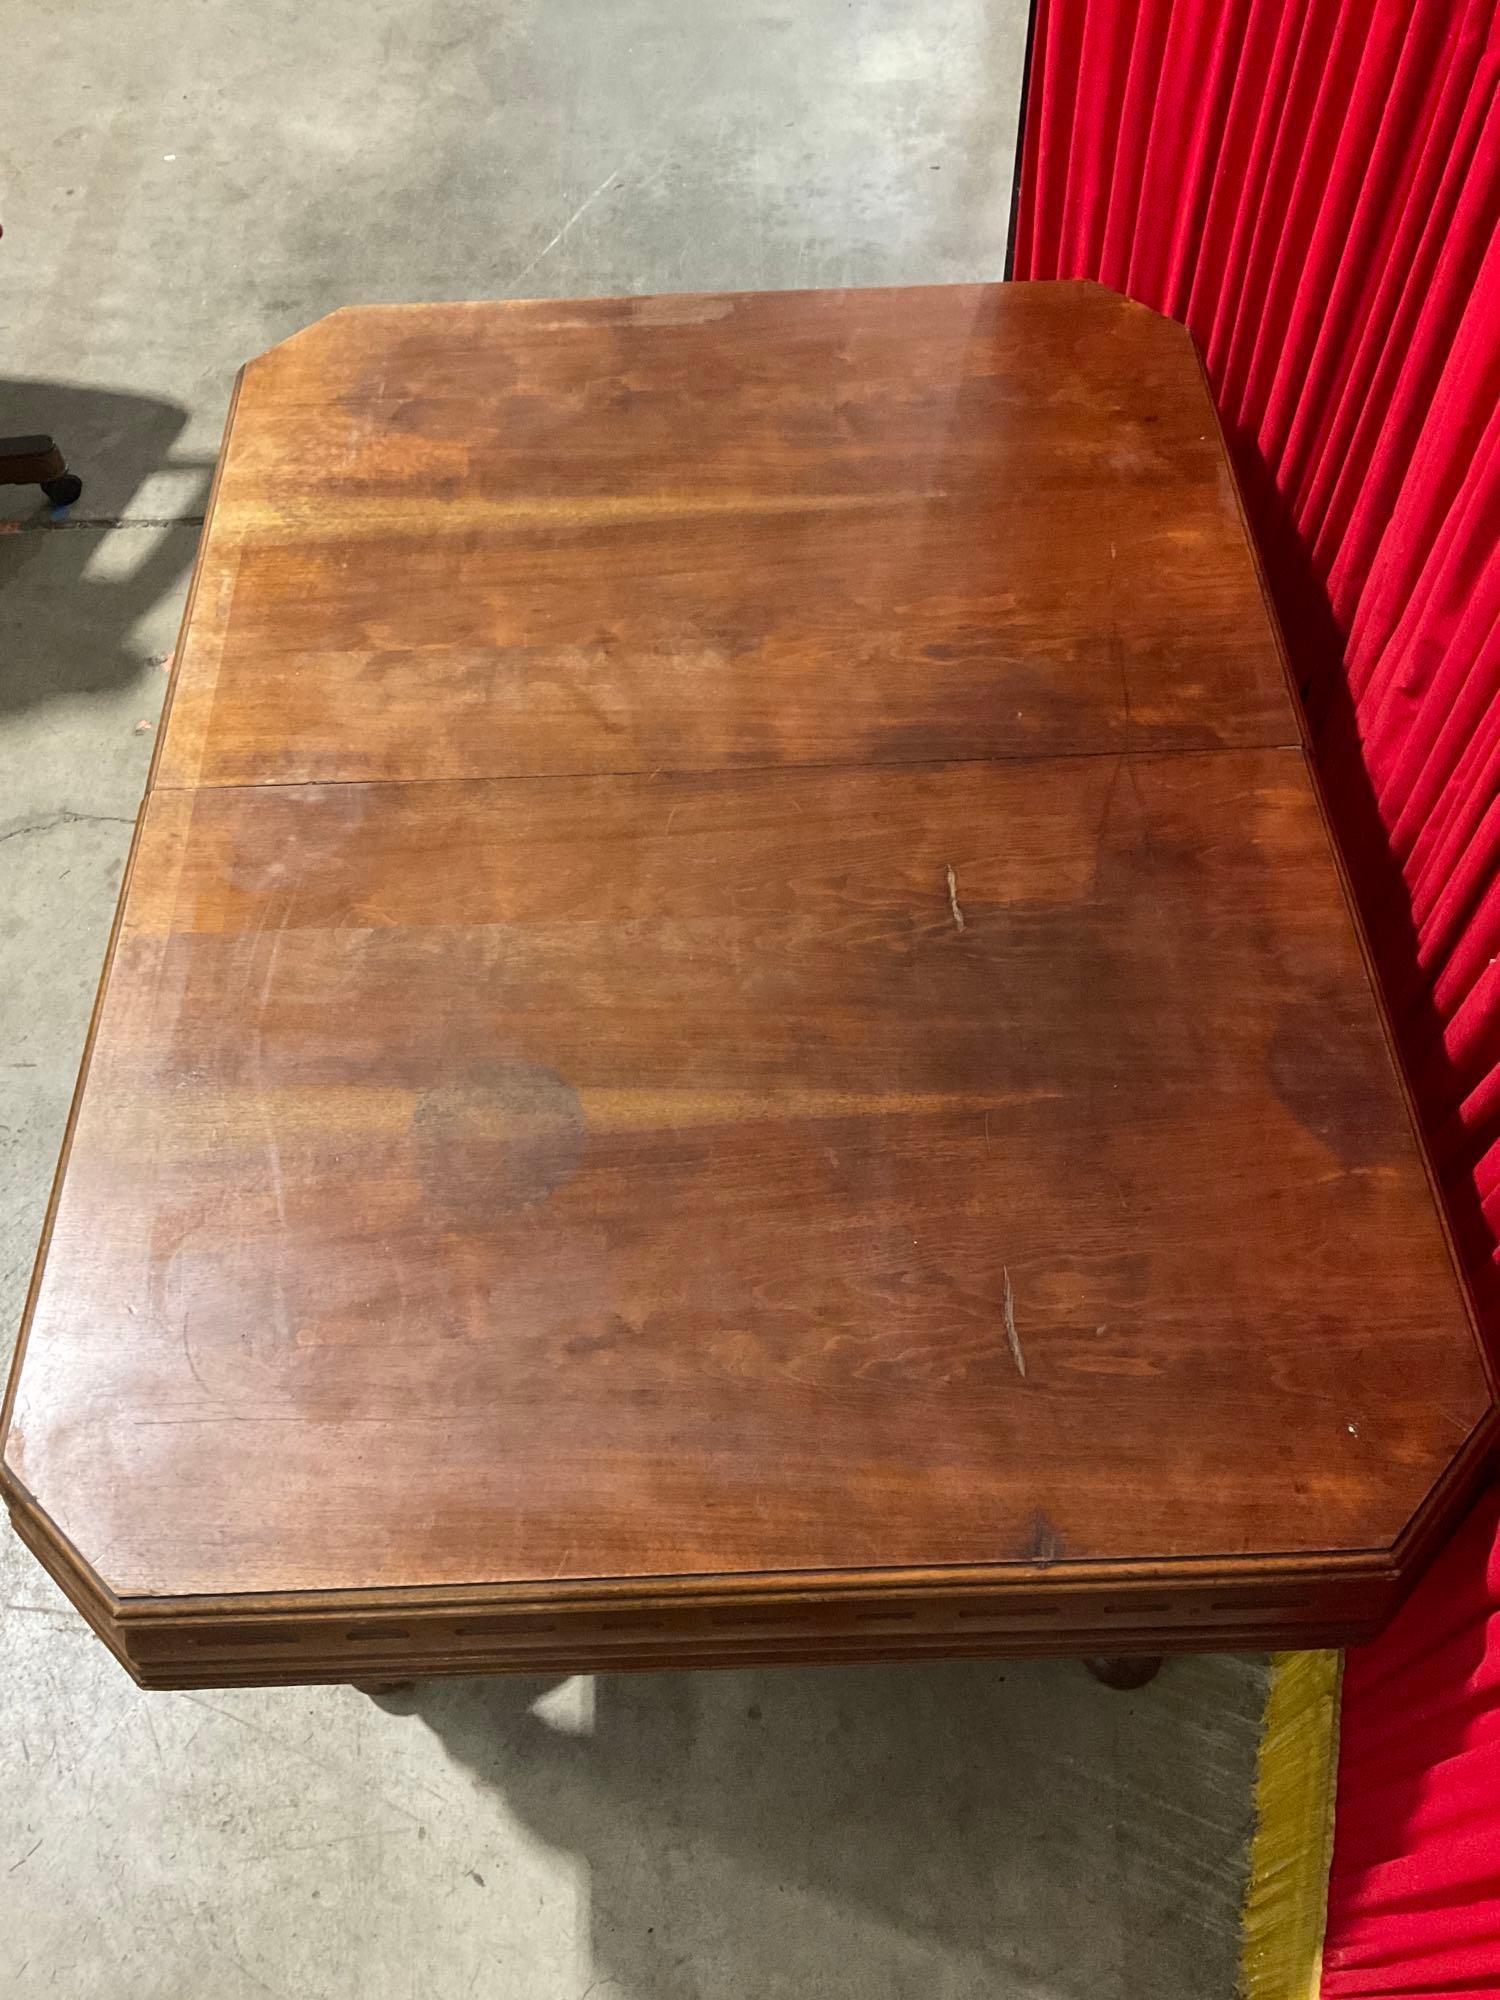 Antique Split Base Americana Wooden Dining Table w/ Fold Out Leaf. See pics.